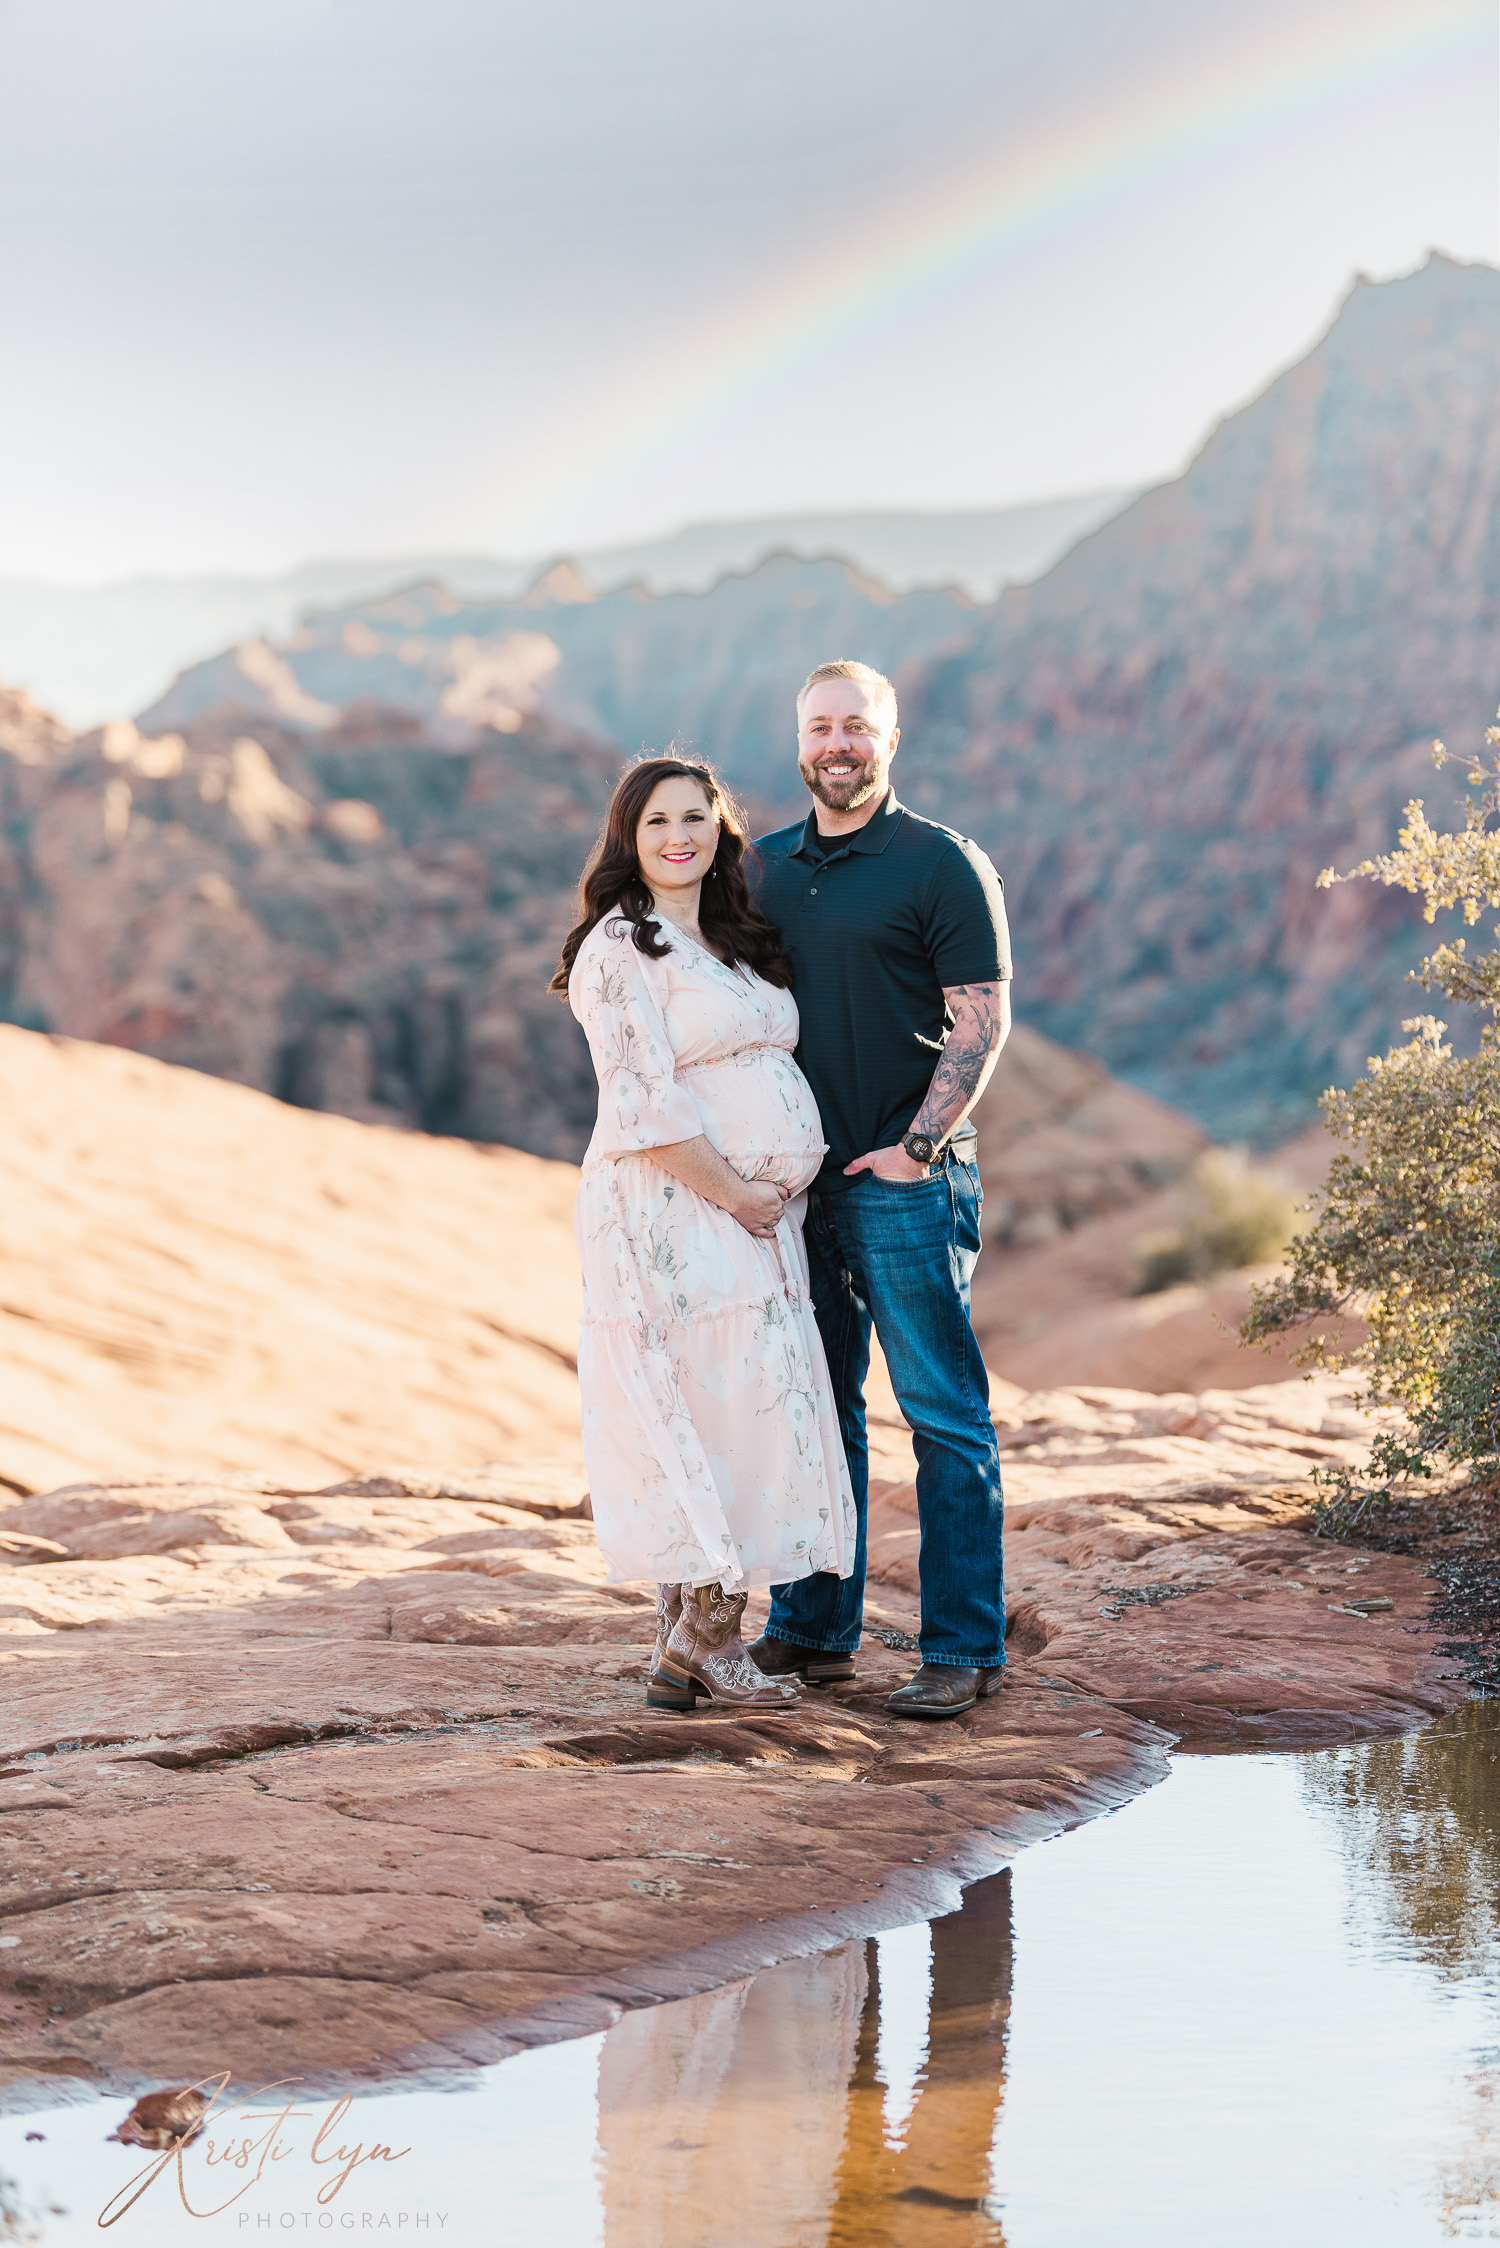 Rainbow over expectant parents during maternity session